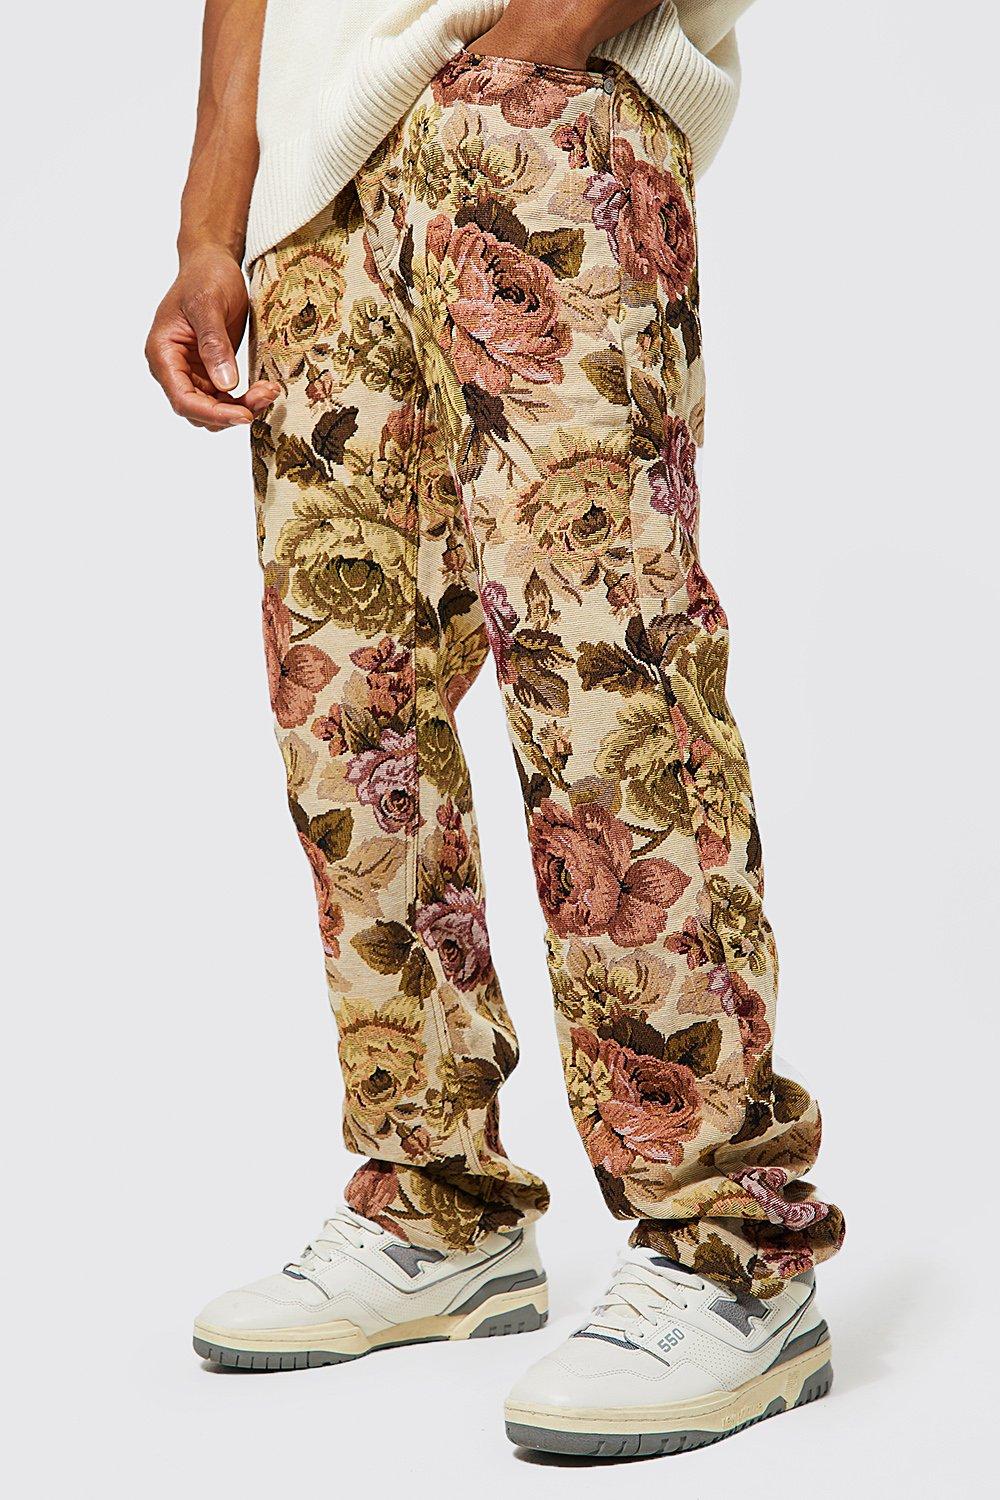 Vulkan Dwell fredelig Relaxed Fit Floral Tapestry Jeans | boohooMAN USA